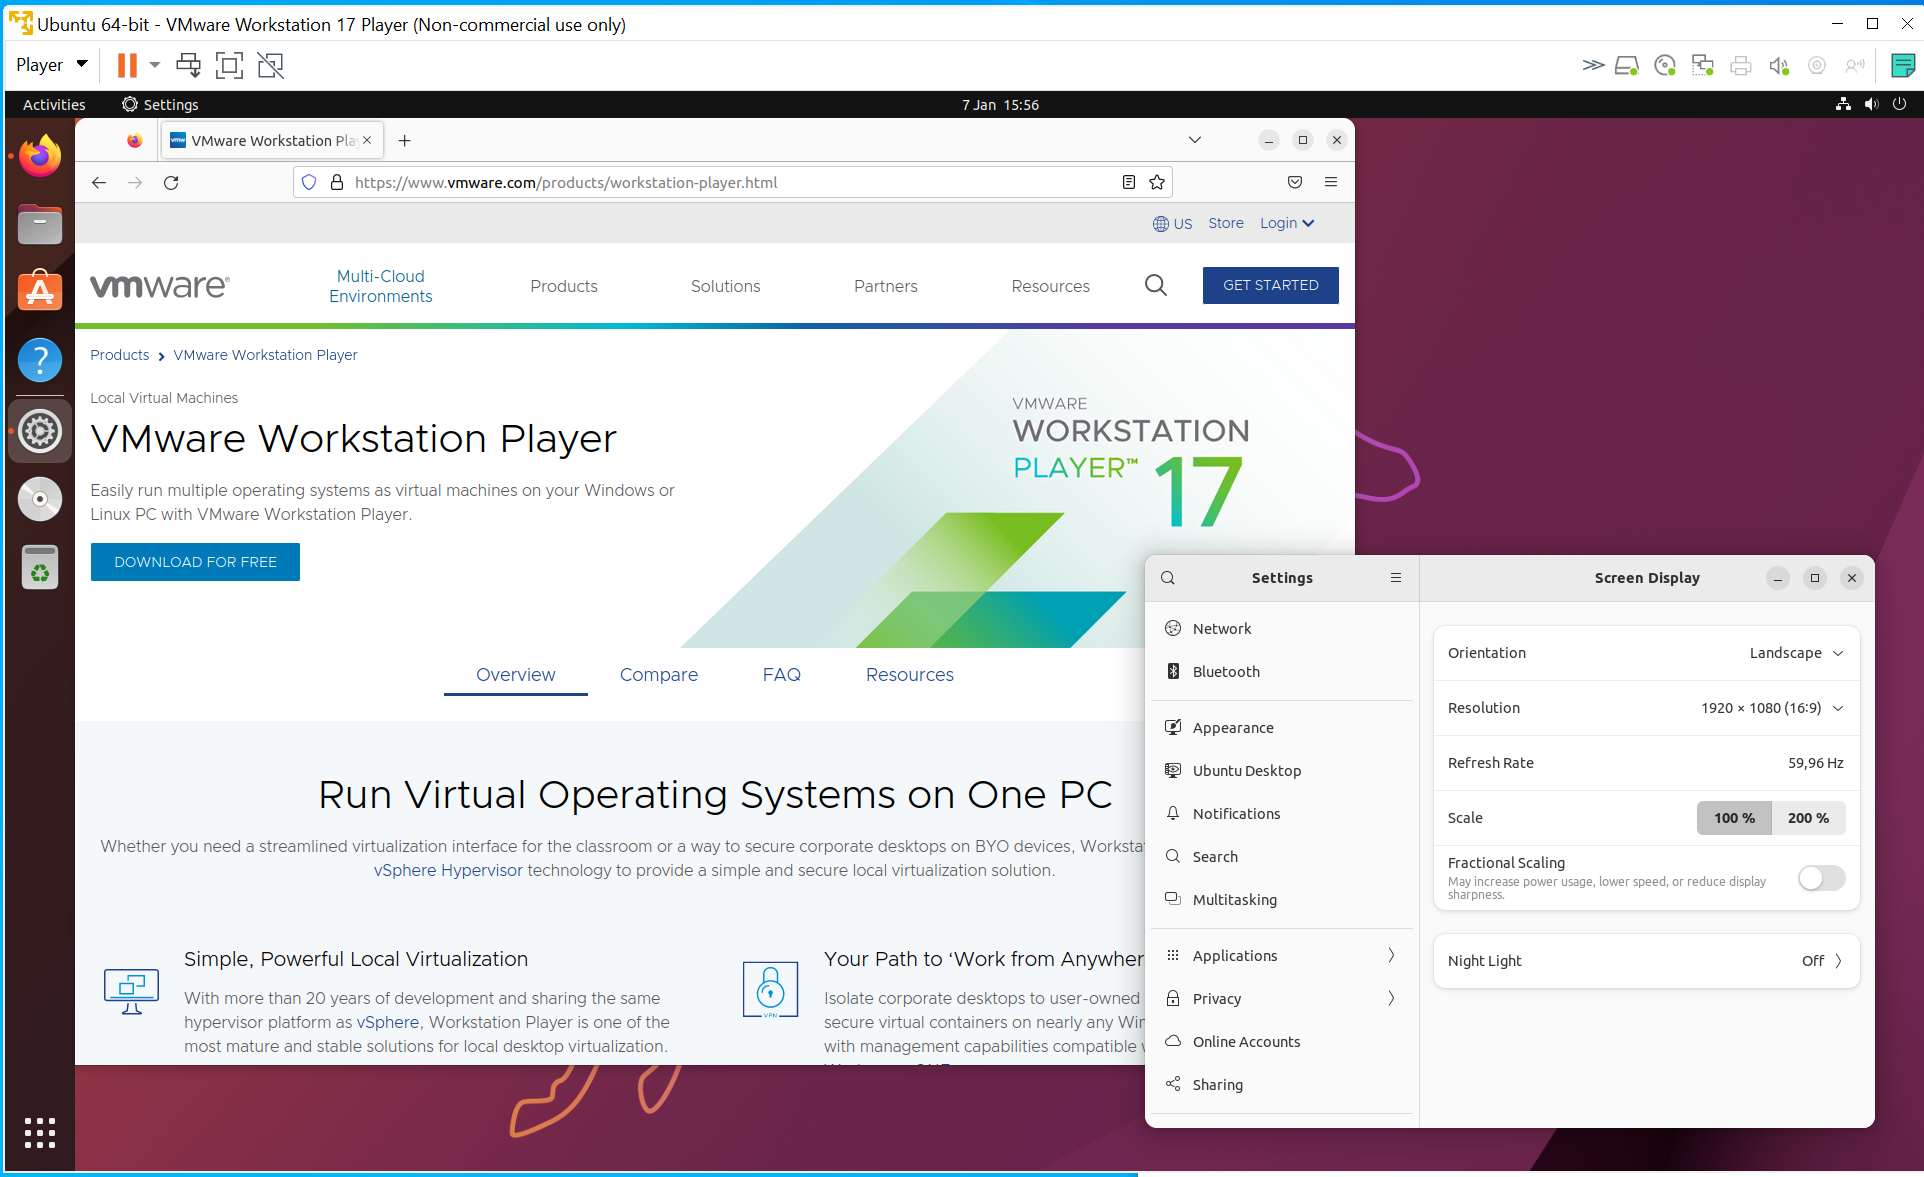 Testing out software under Windows 10 with virtual machines